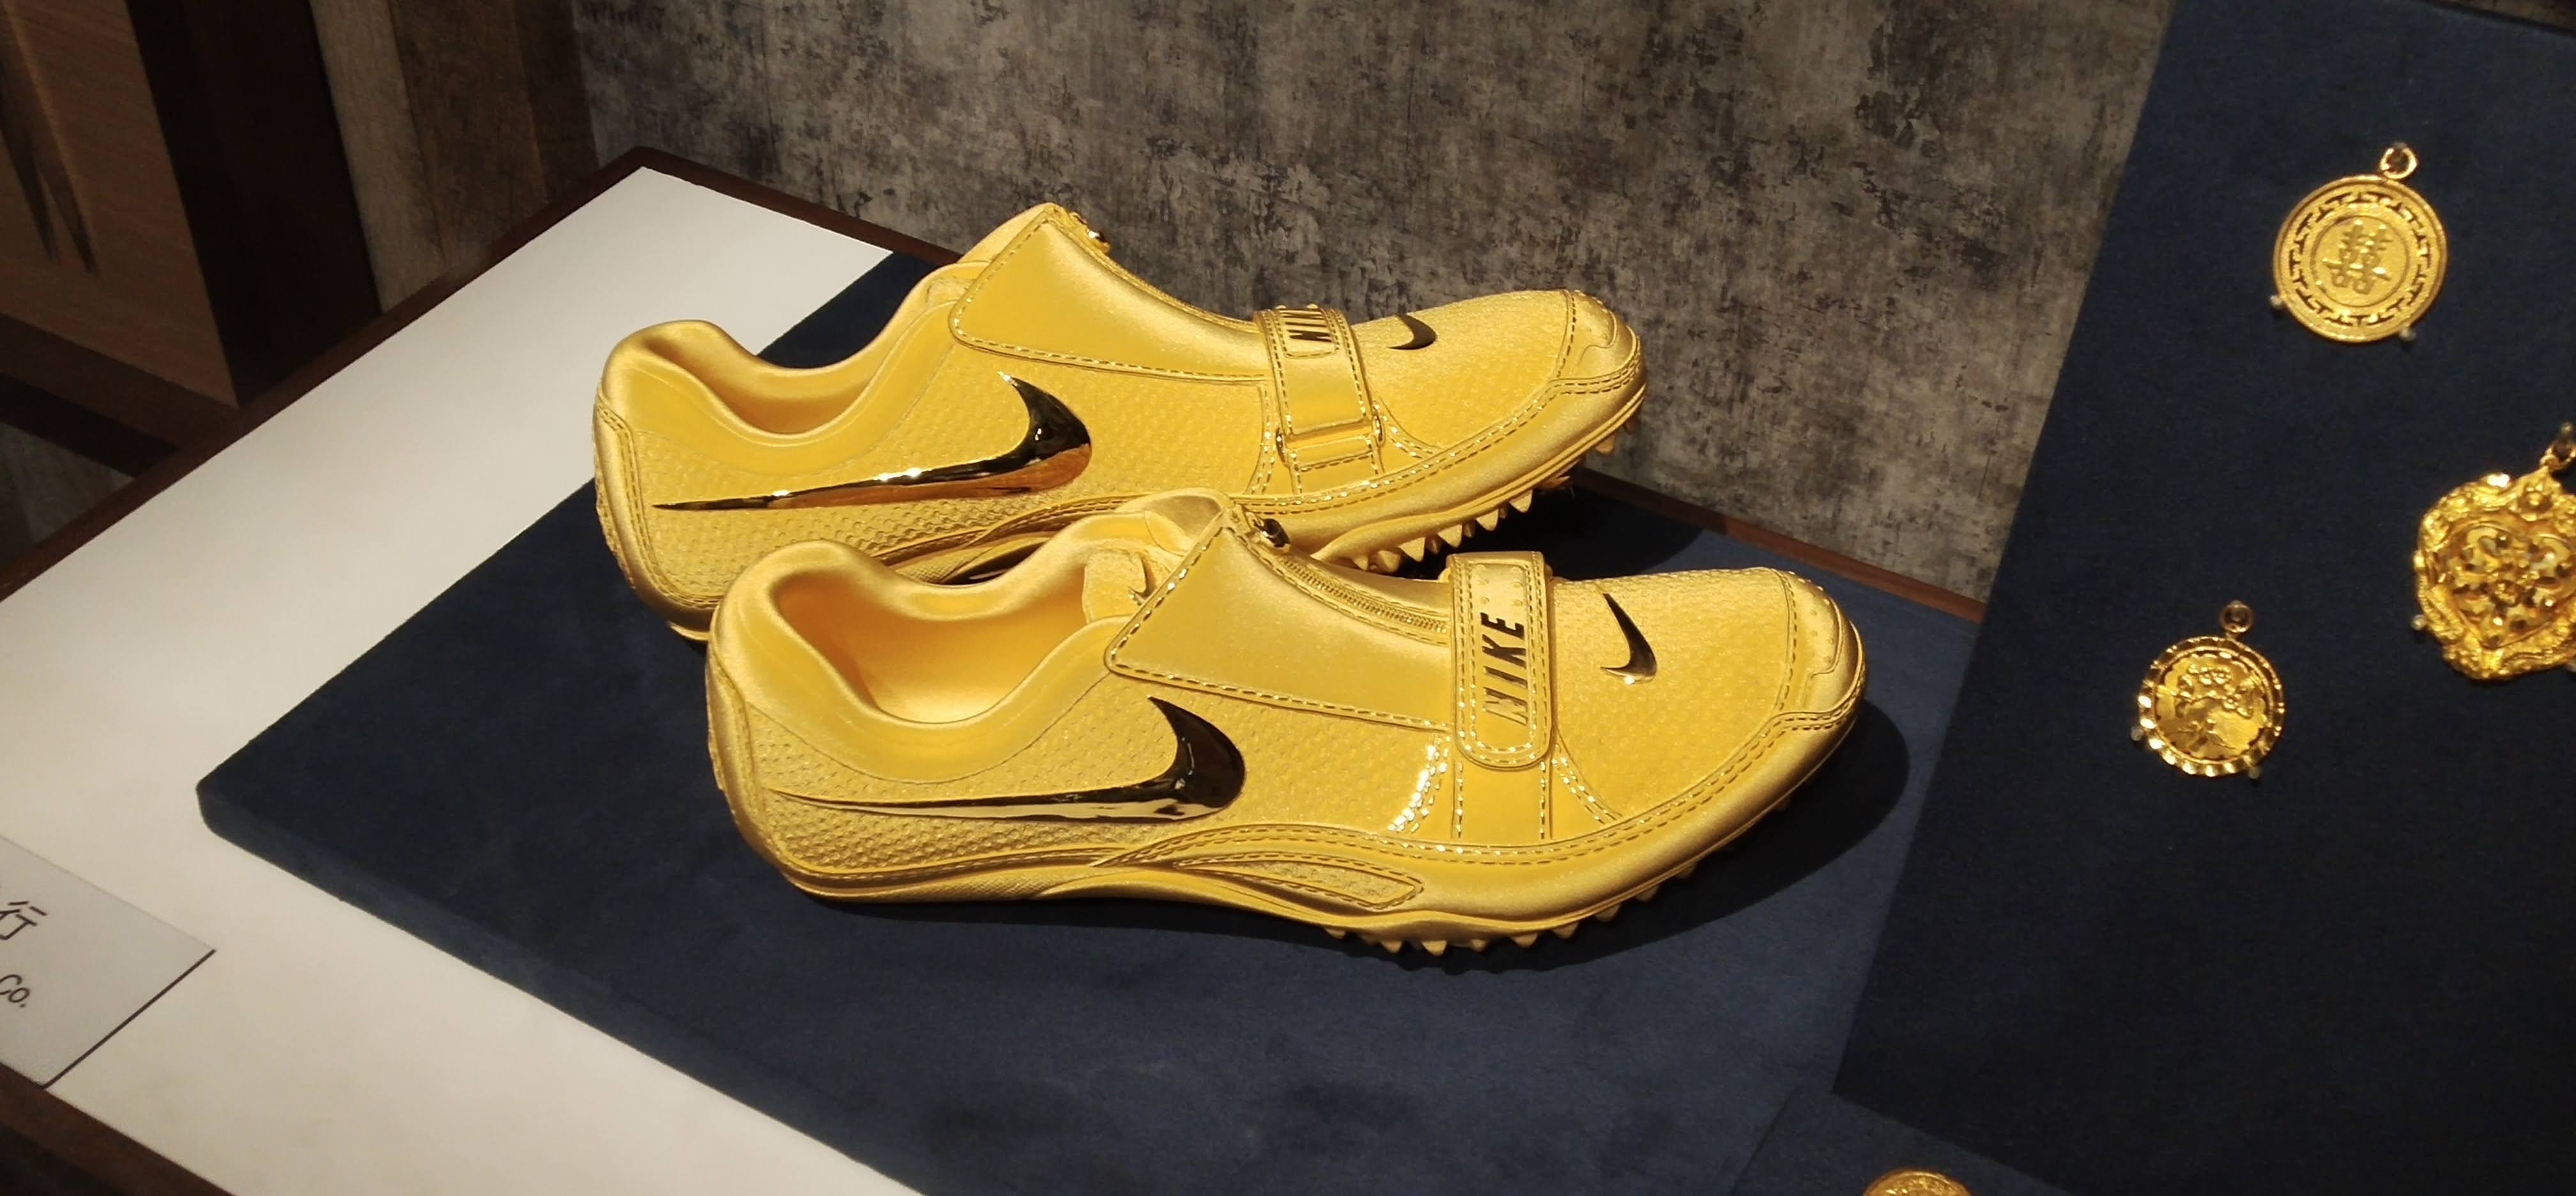 How about buyiing the sports shoes made by the gold